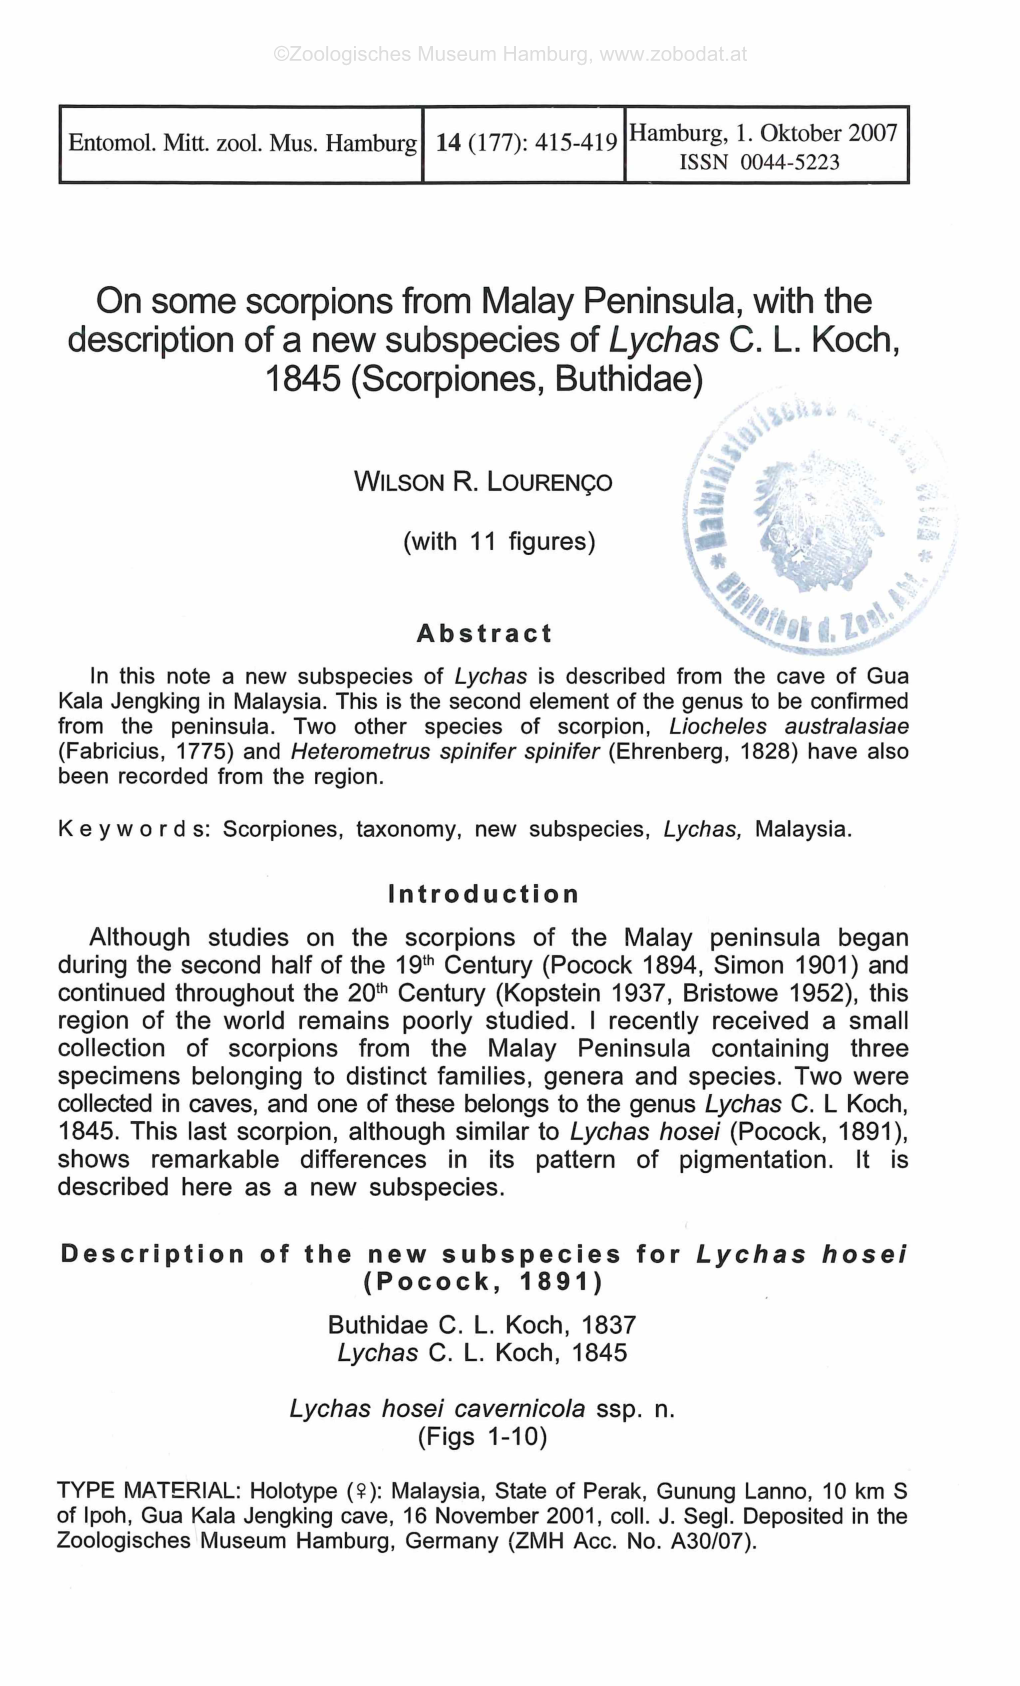 On Some Scorpions from Malay Peninsula, with the Description of a New Subspecies of Lychas C